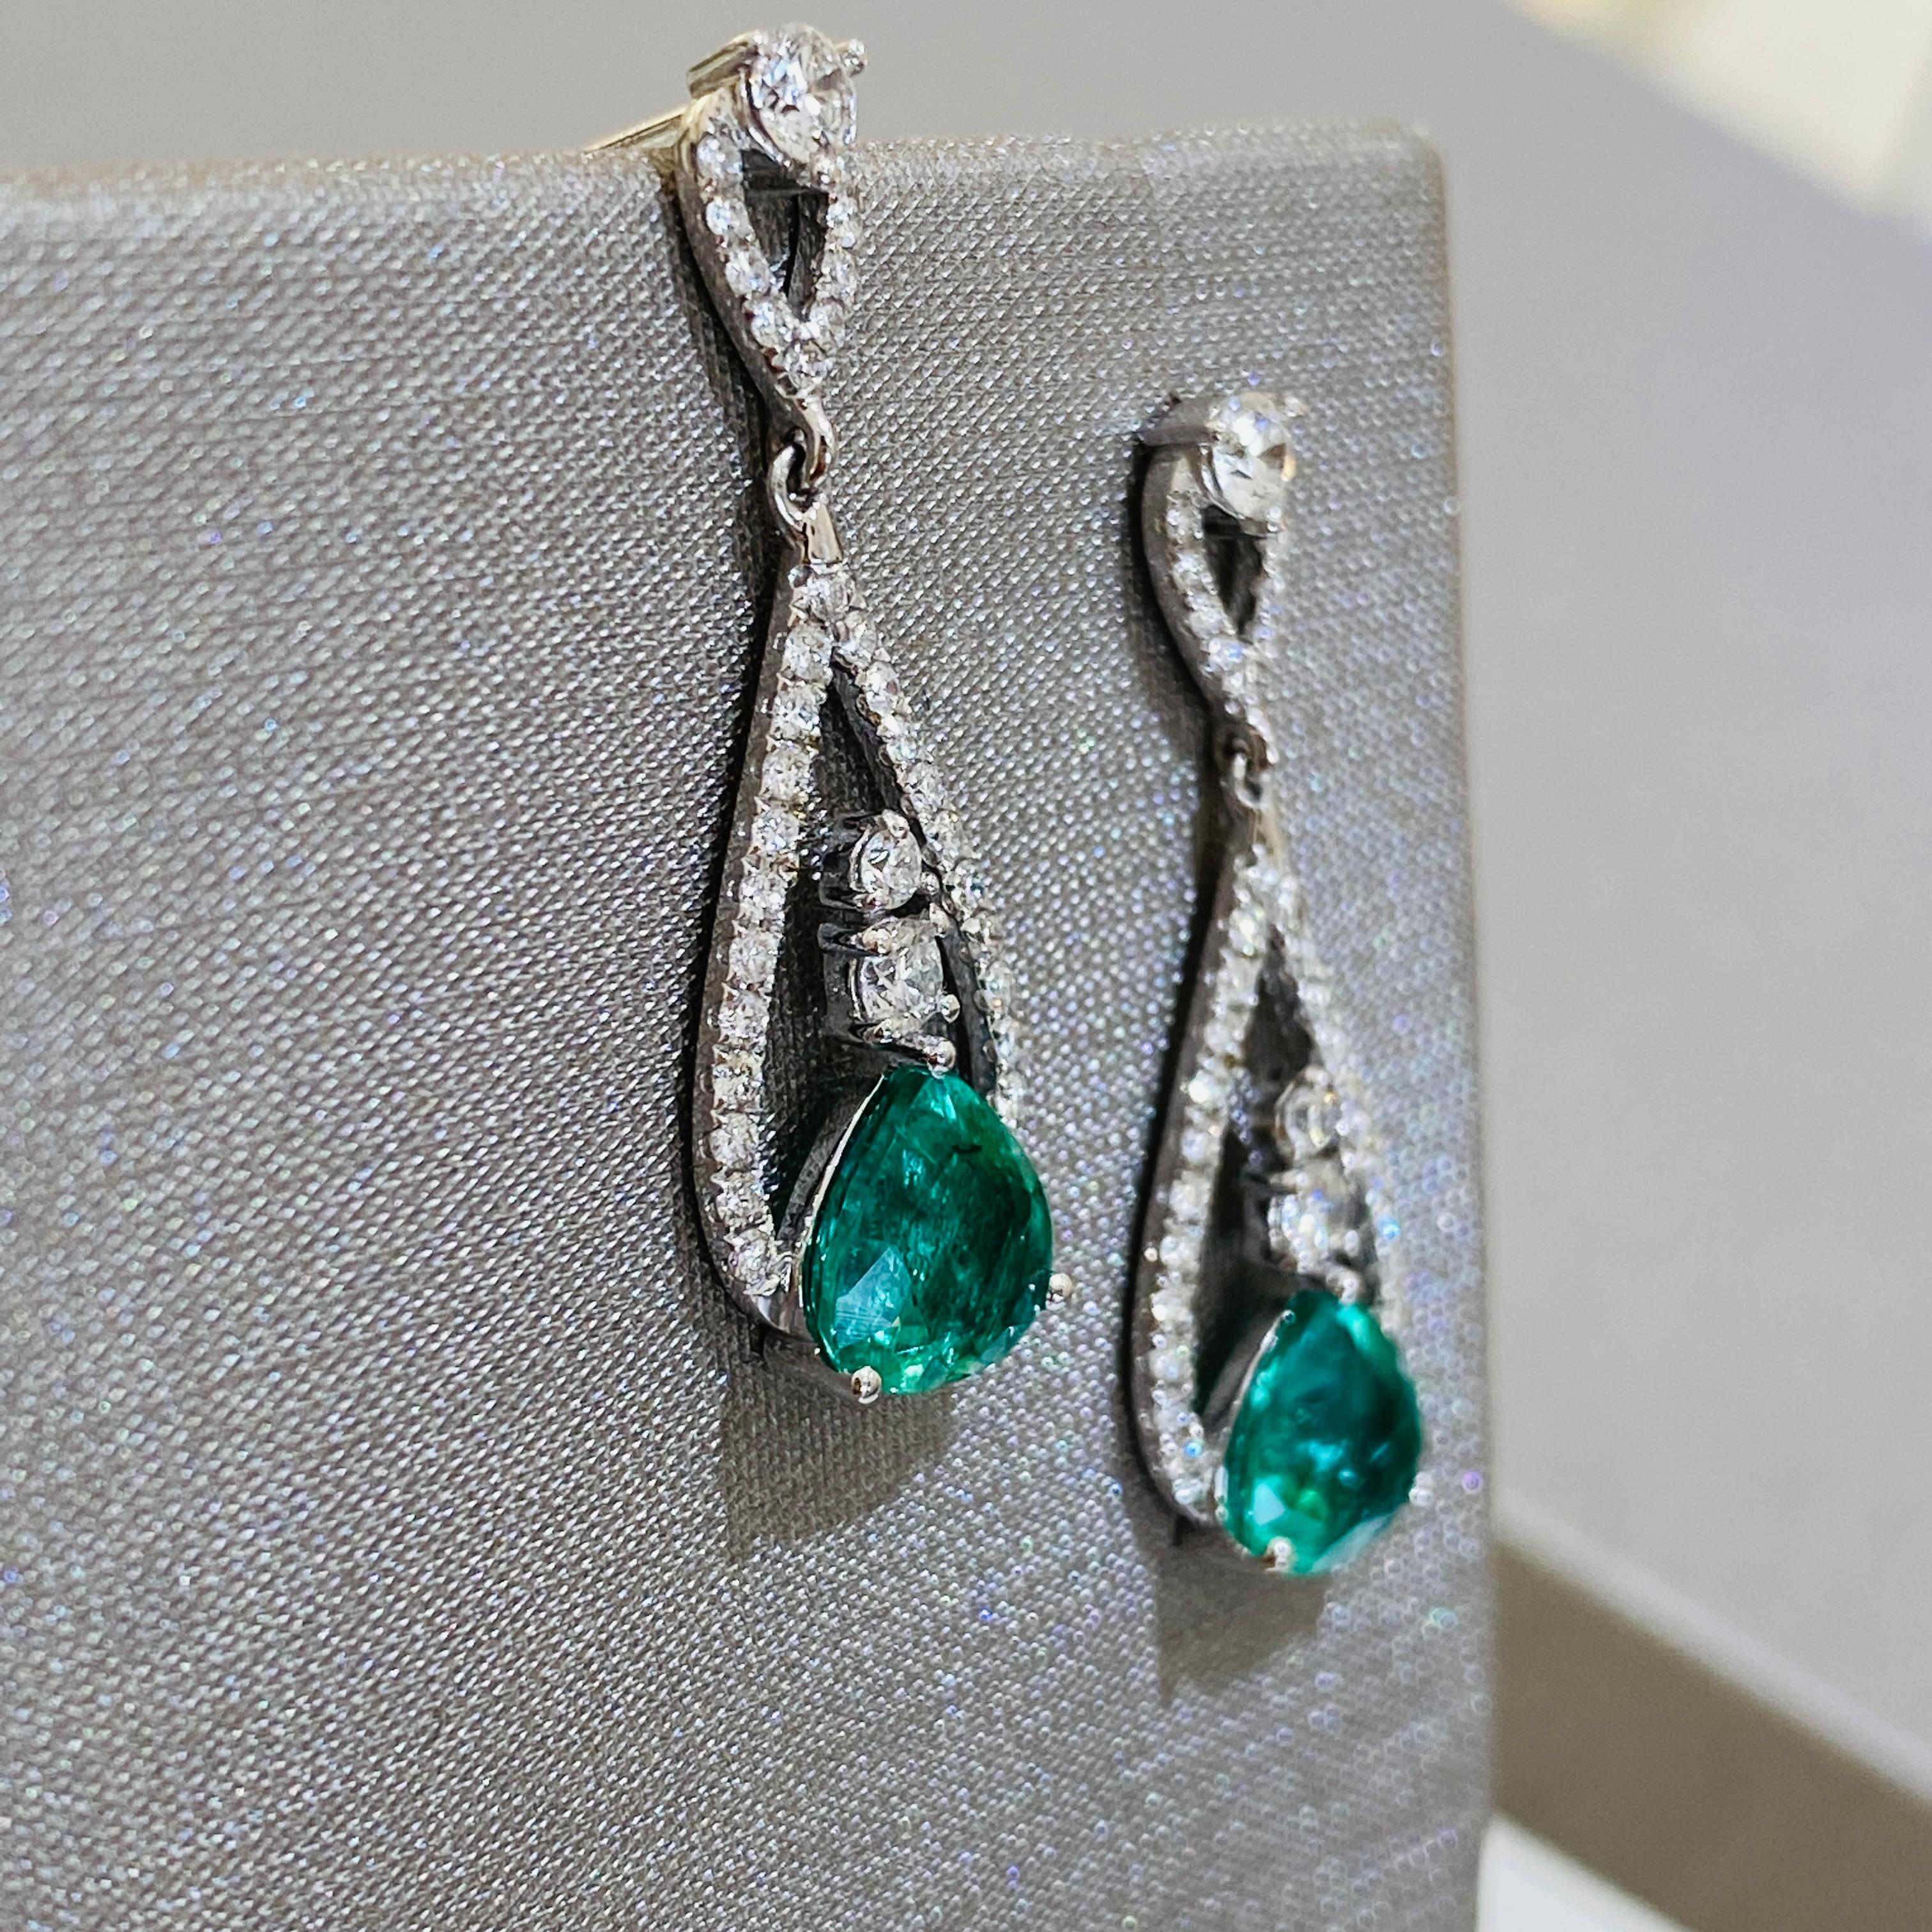 Tresor Diamond Earring features 0.70 cts diamond and 2.04 cts emerald in 18k white gold. The Earring are an ode to the luxurious yet classic beauty with sparkly diamonds. Their contemporary and modern design makes them versatile in their use. The